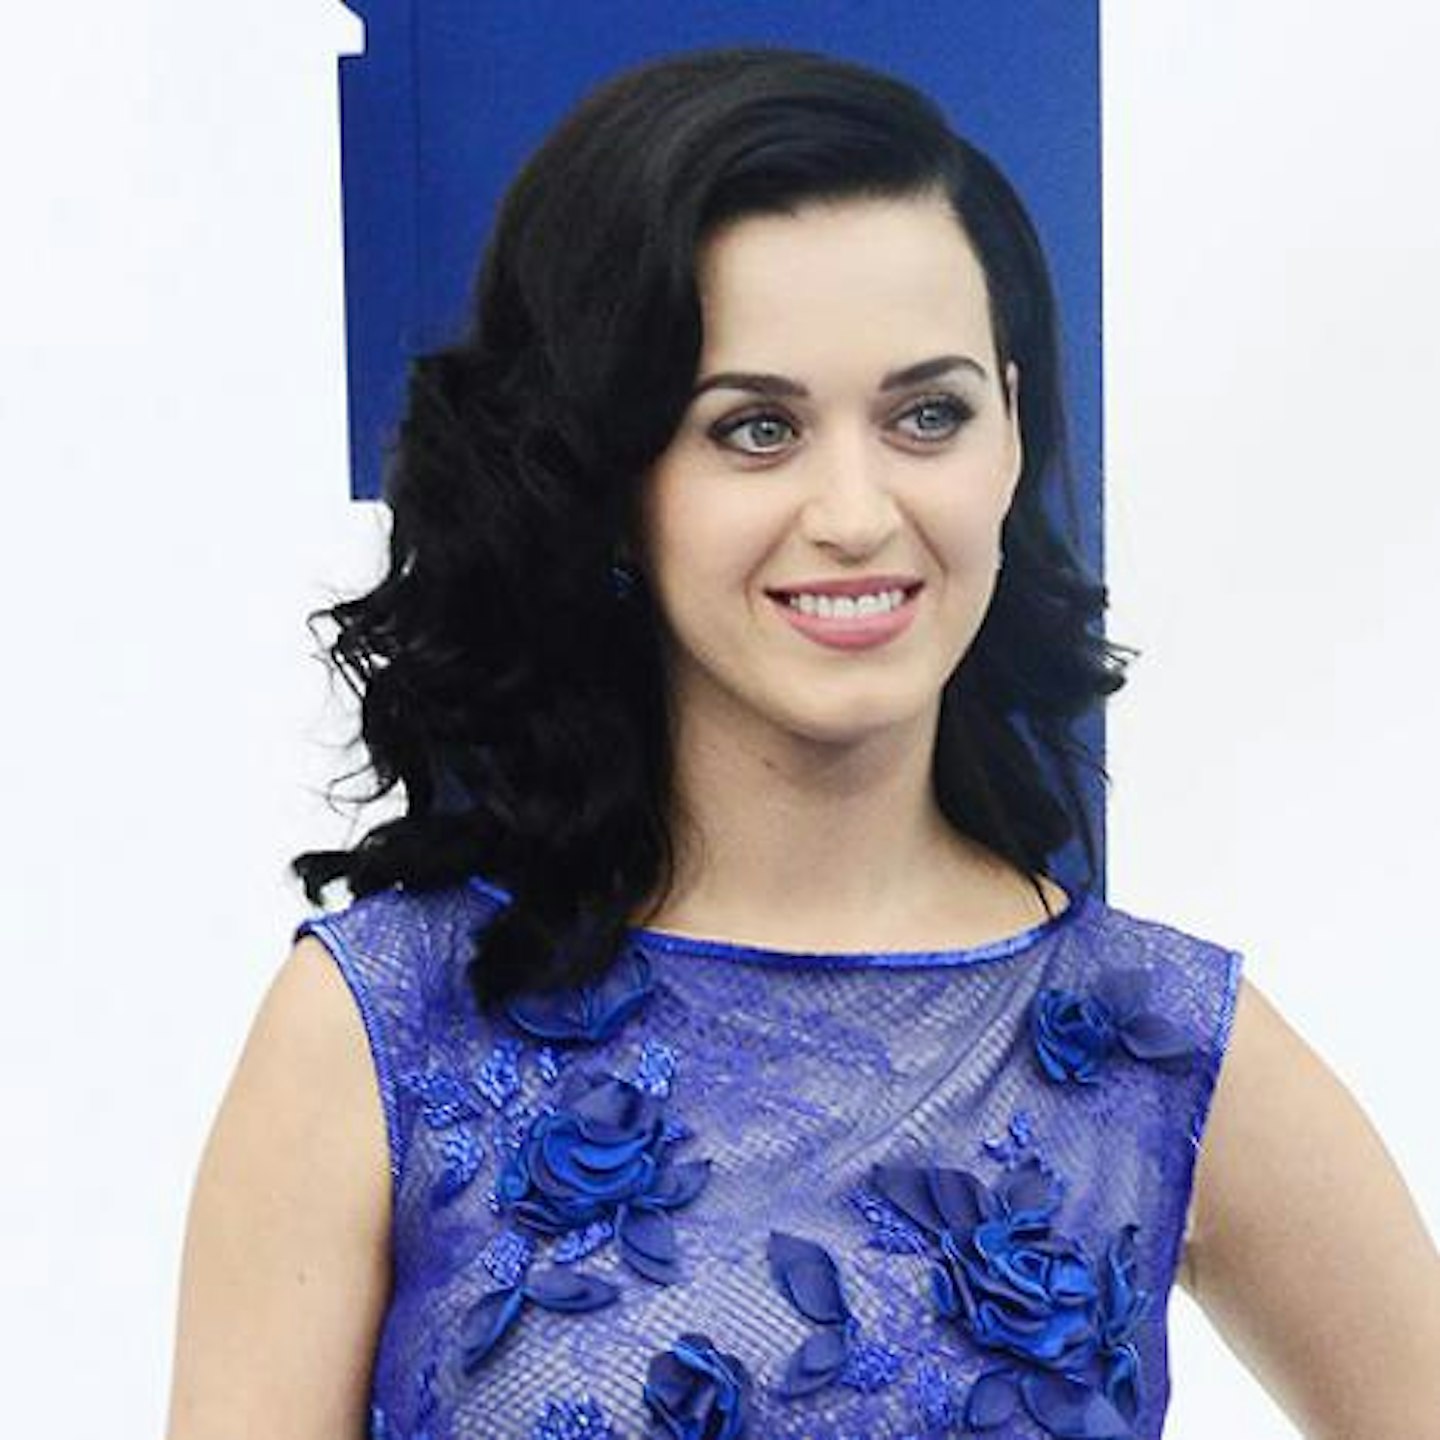 Katy Perry's skin was glowing at the Smurfs premiere this week